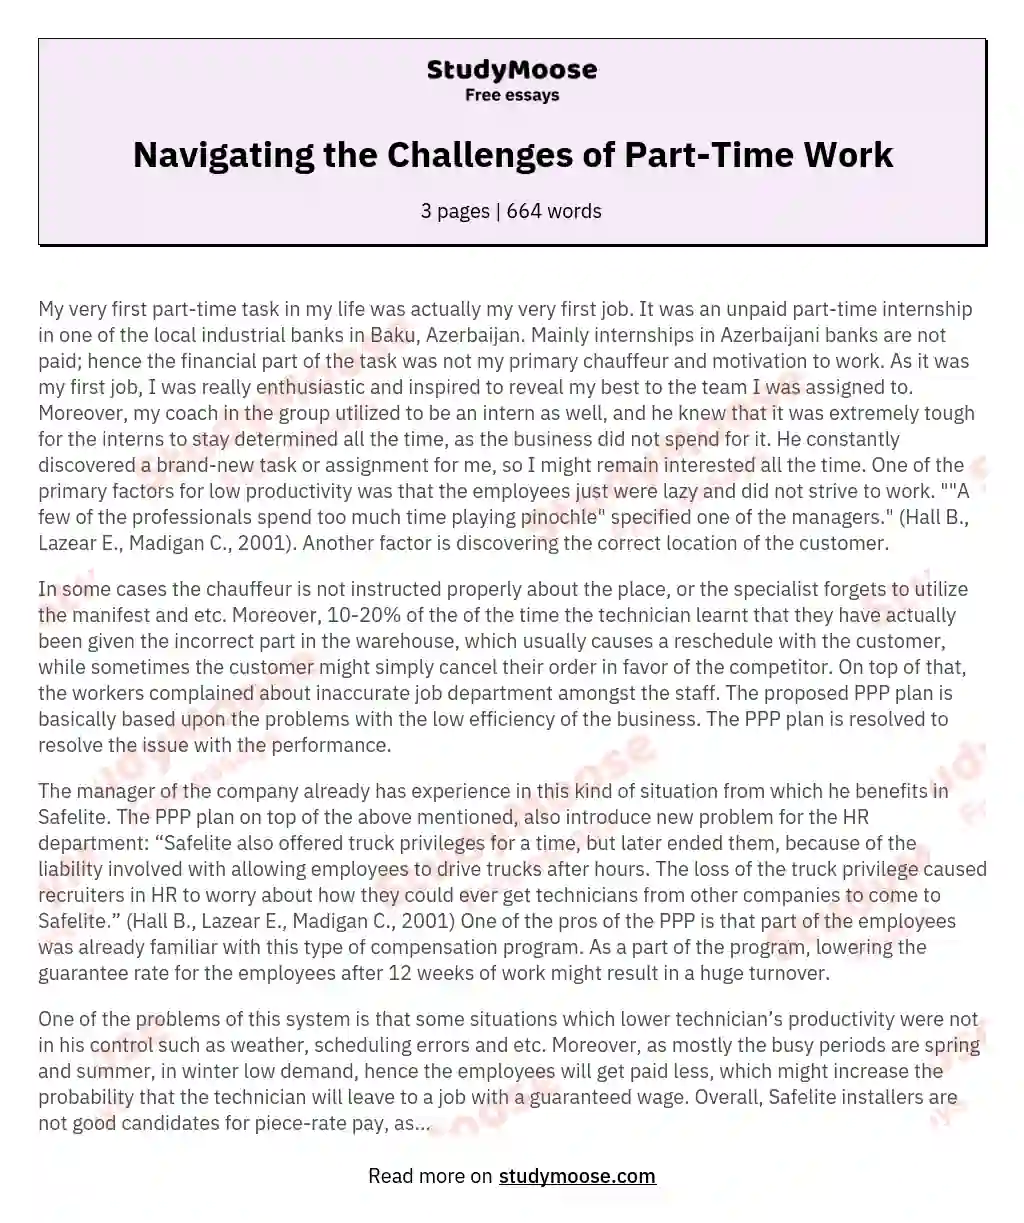 Navigating the Challenges of Part-Time Work essay